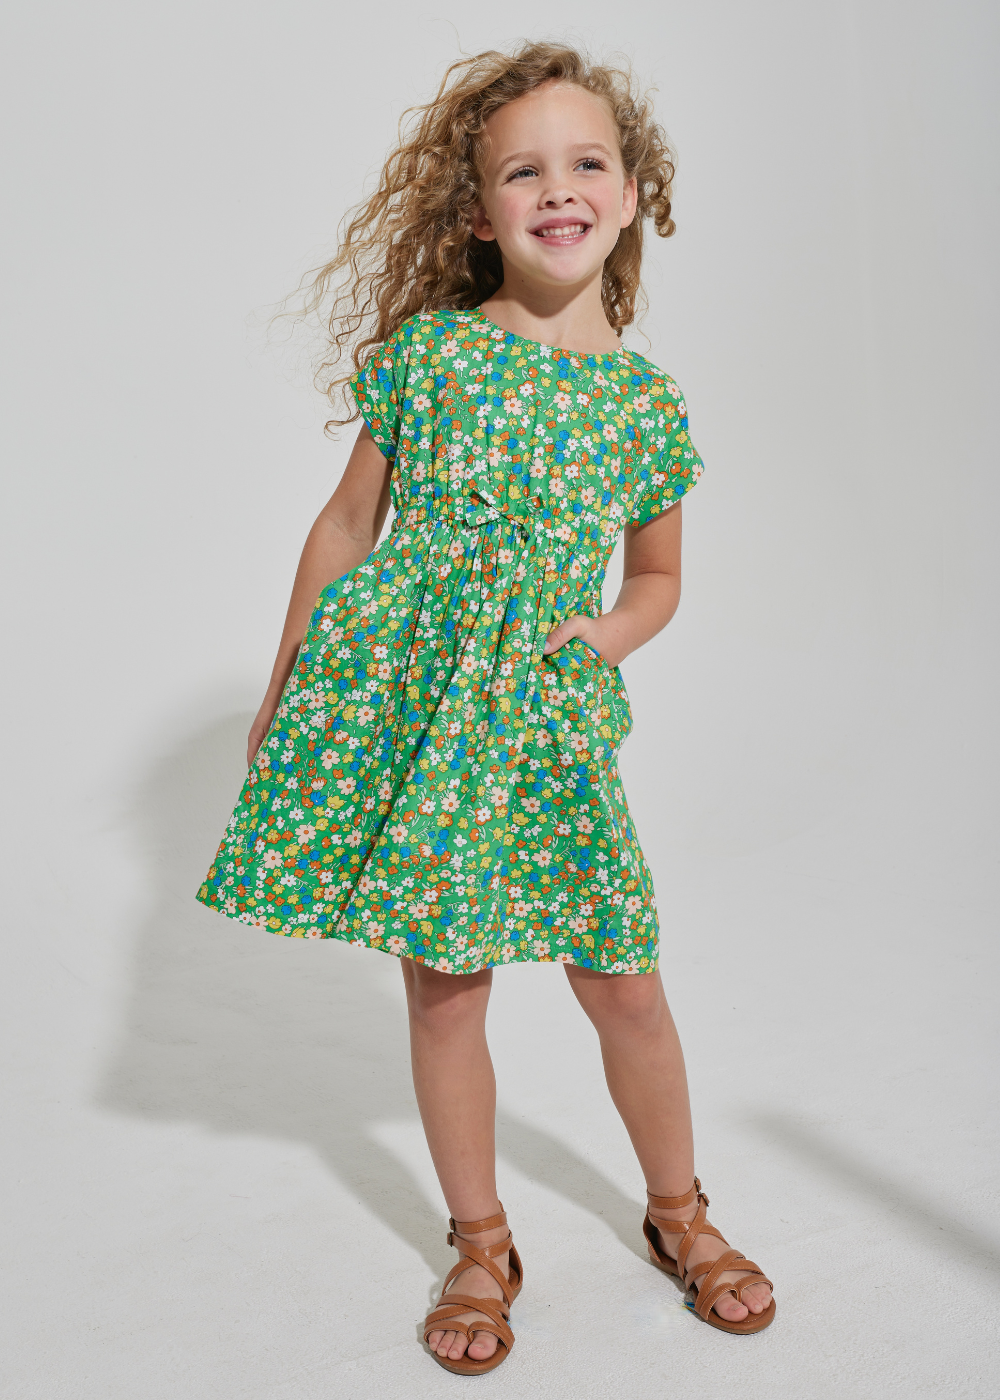 woven Kelly Green floral dress with pockets for girls